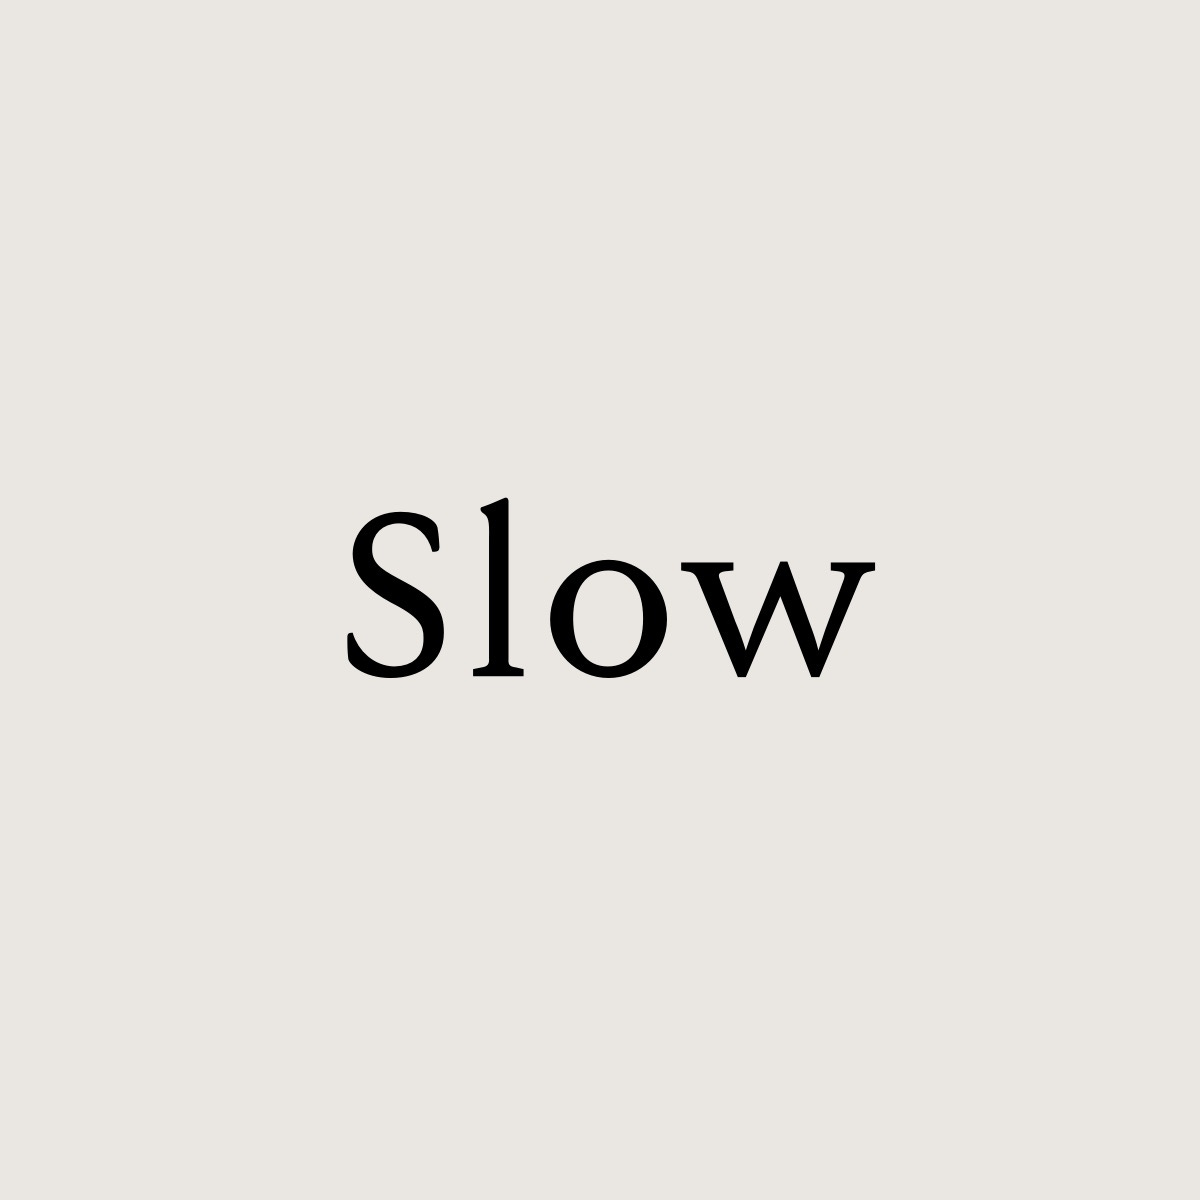 Slow – Cultivating arts, crops and inner gardens